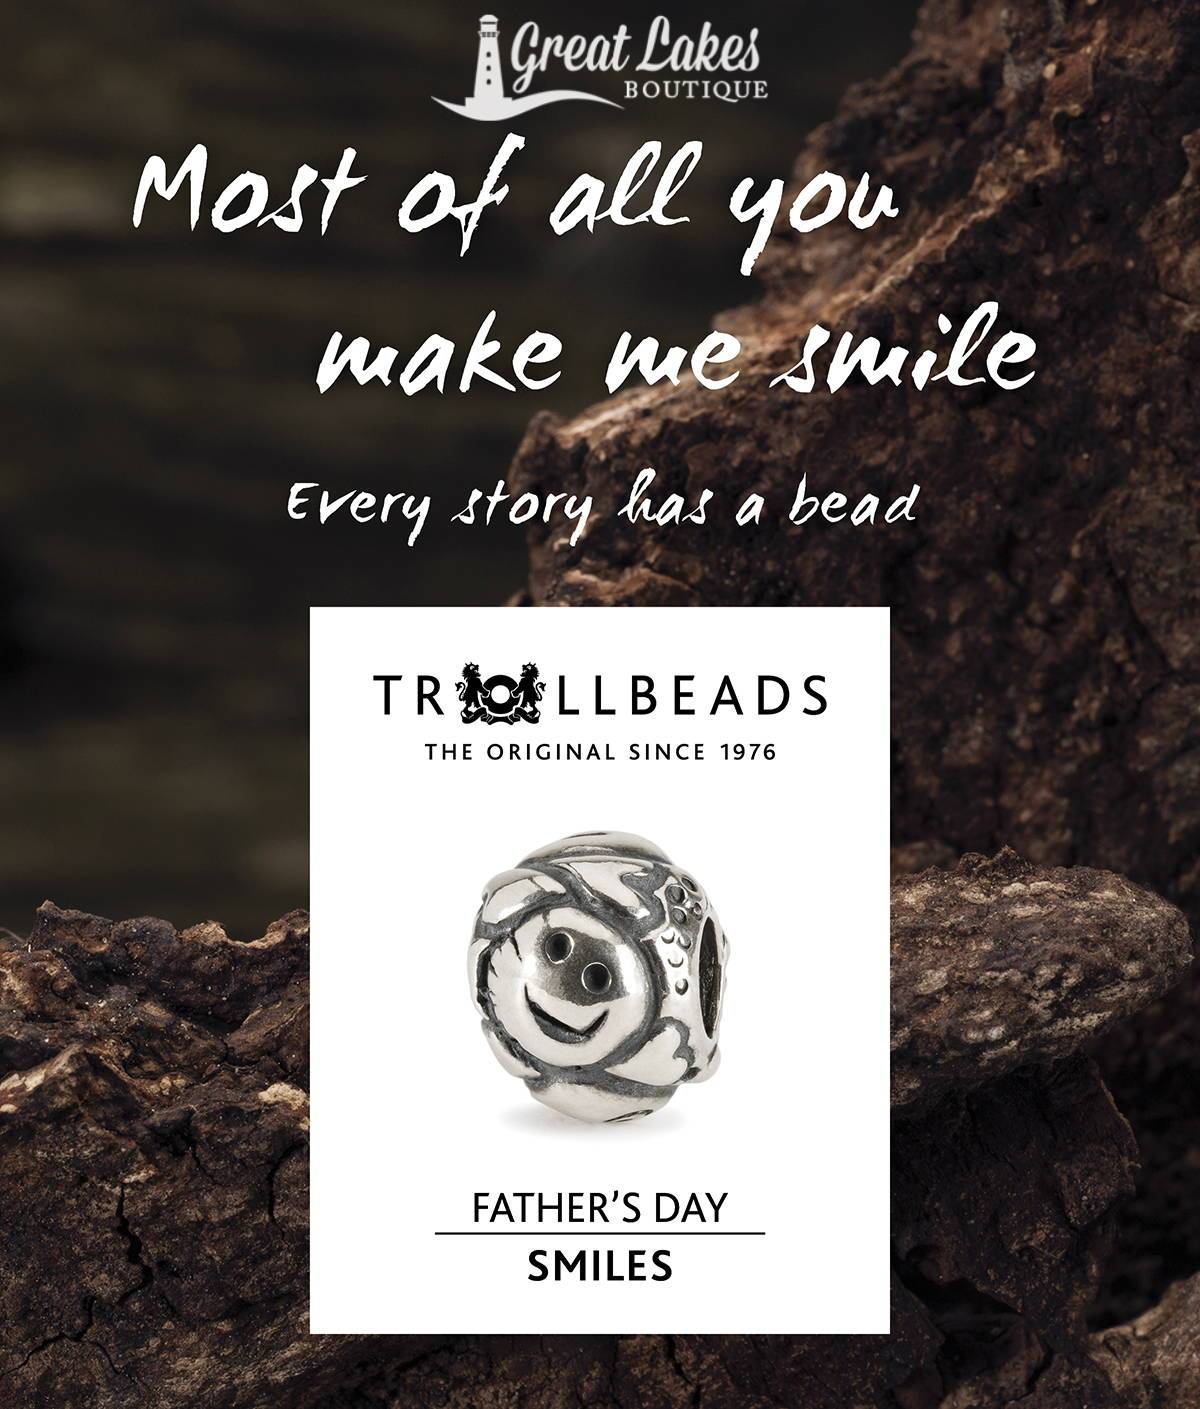 Trollbeads Father's Day 2020 Preview - Trollbeads Smiles